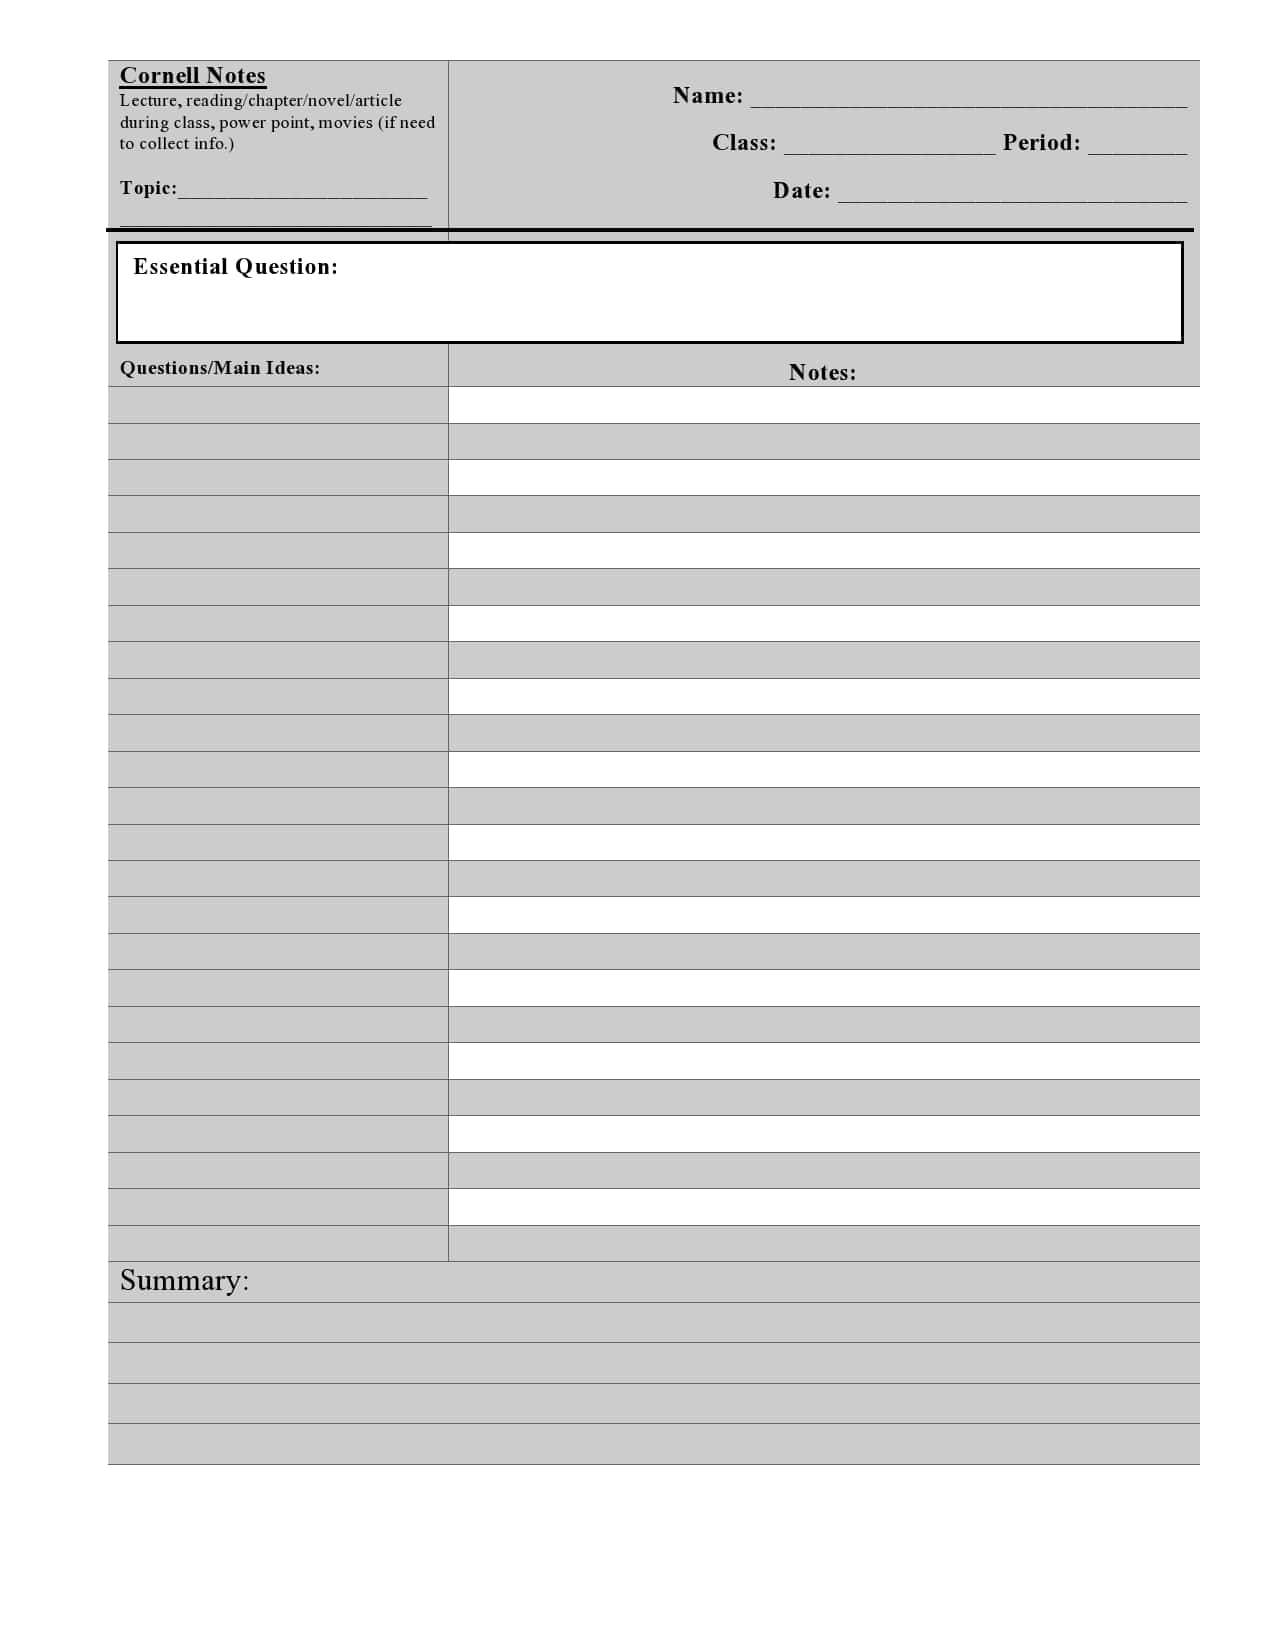 20 Printable Cornell Notes Templates [Free] - TemplateArchive Inside Lecture Notes Template Word